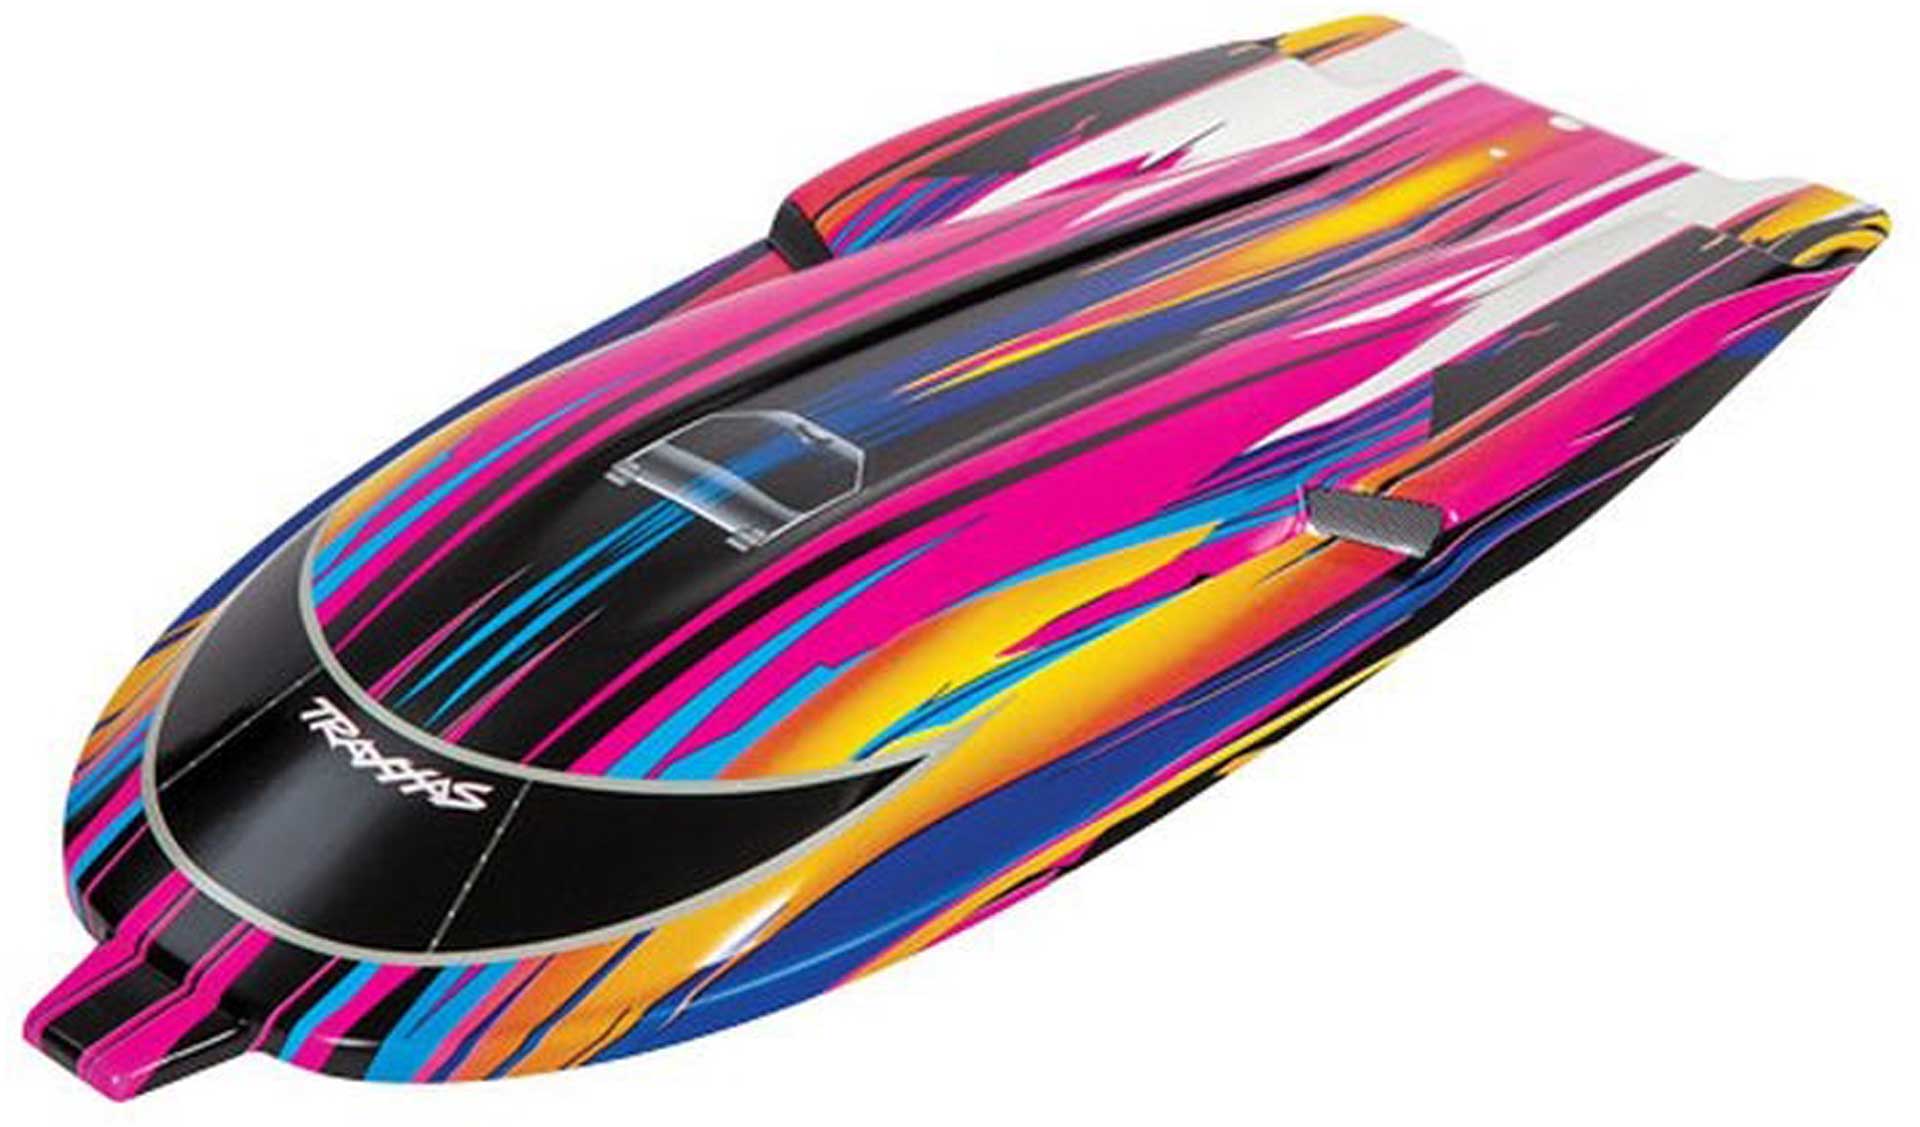 TRAXXAS Hullcover Spartan pink graphic